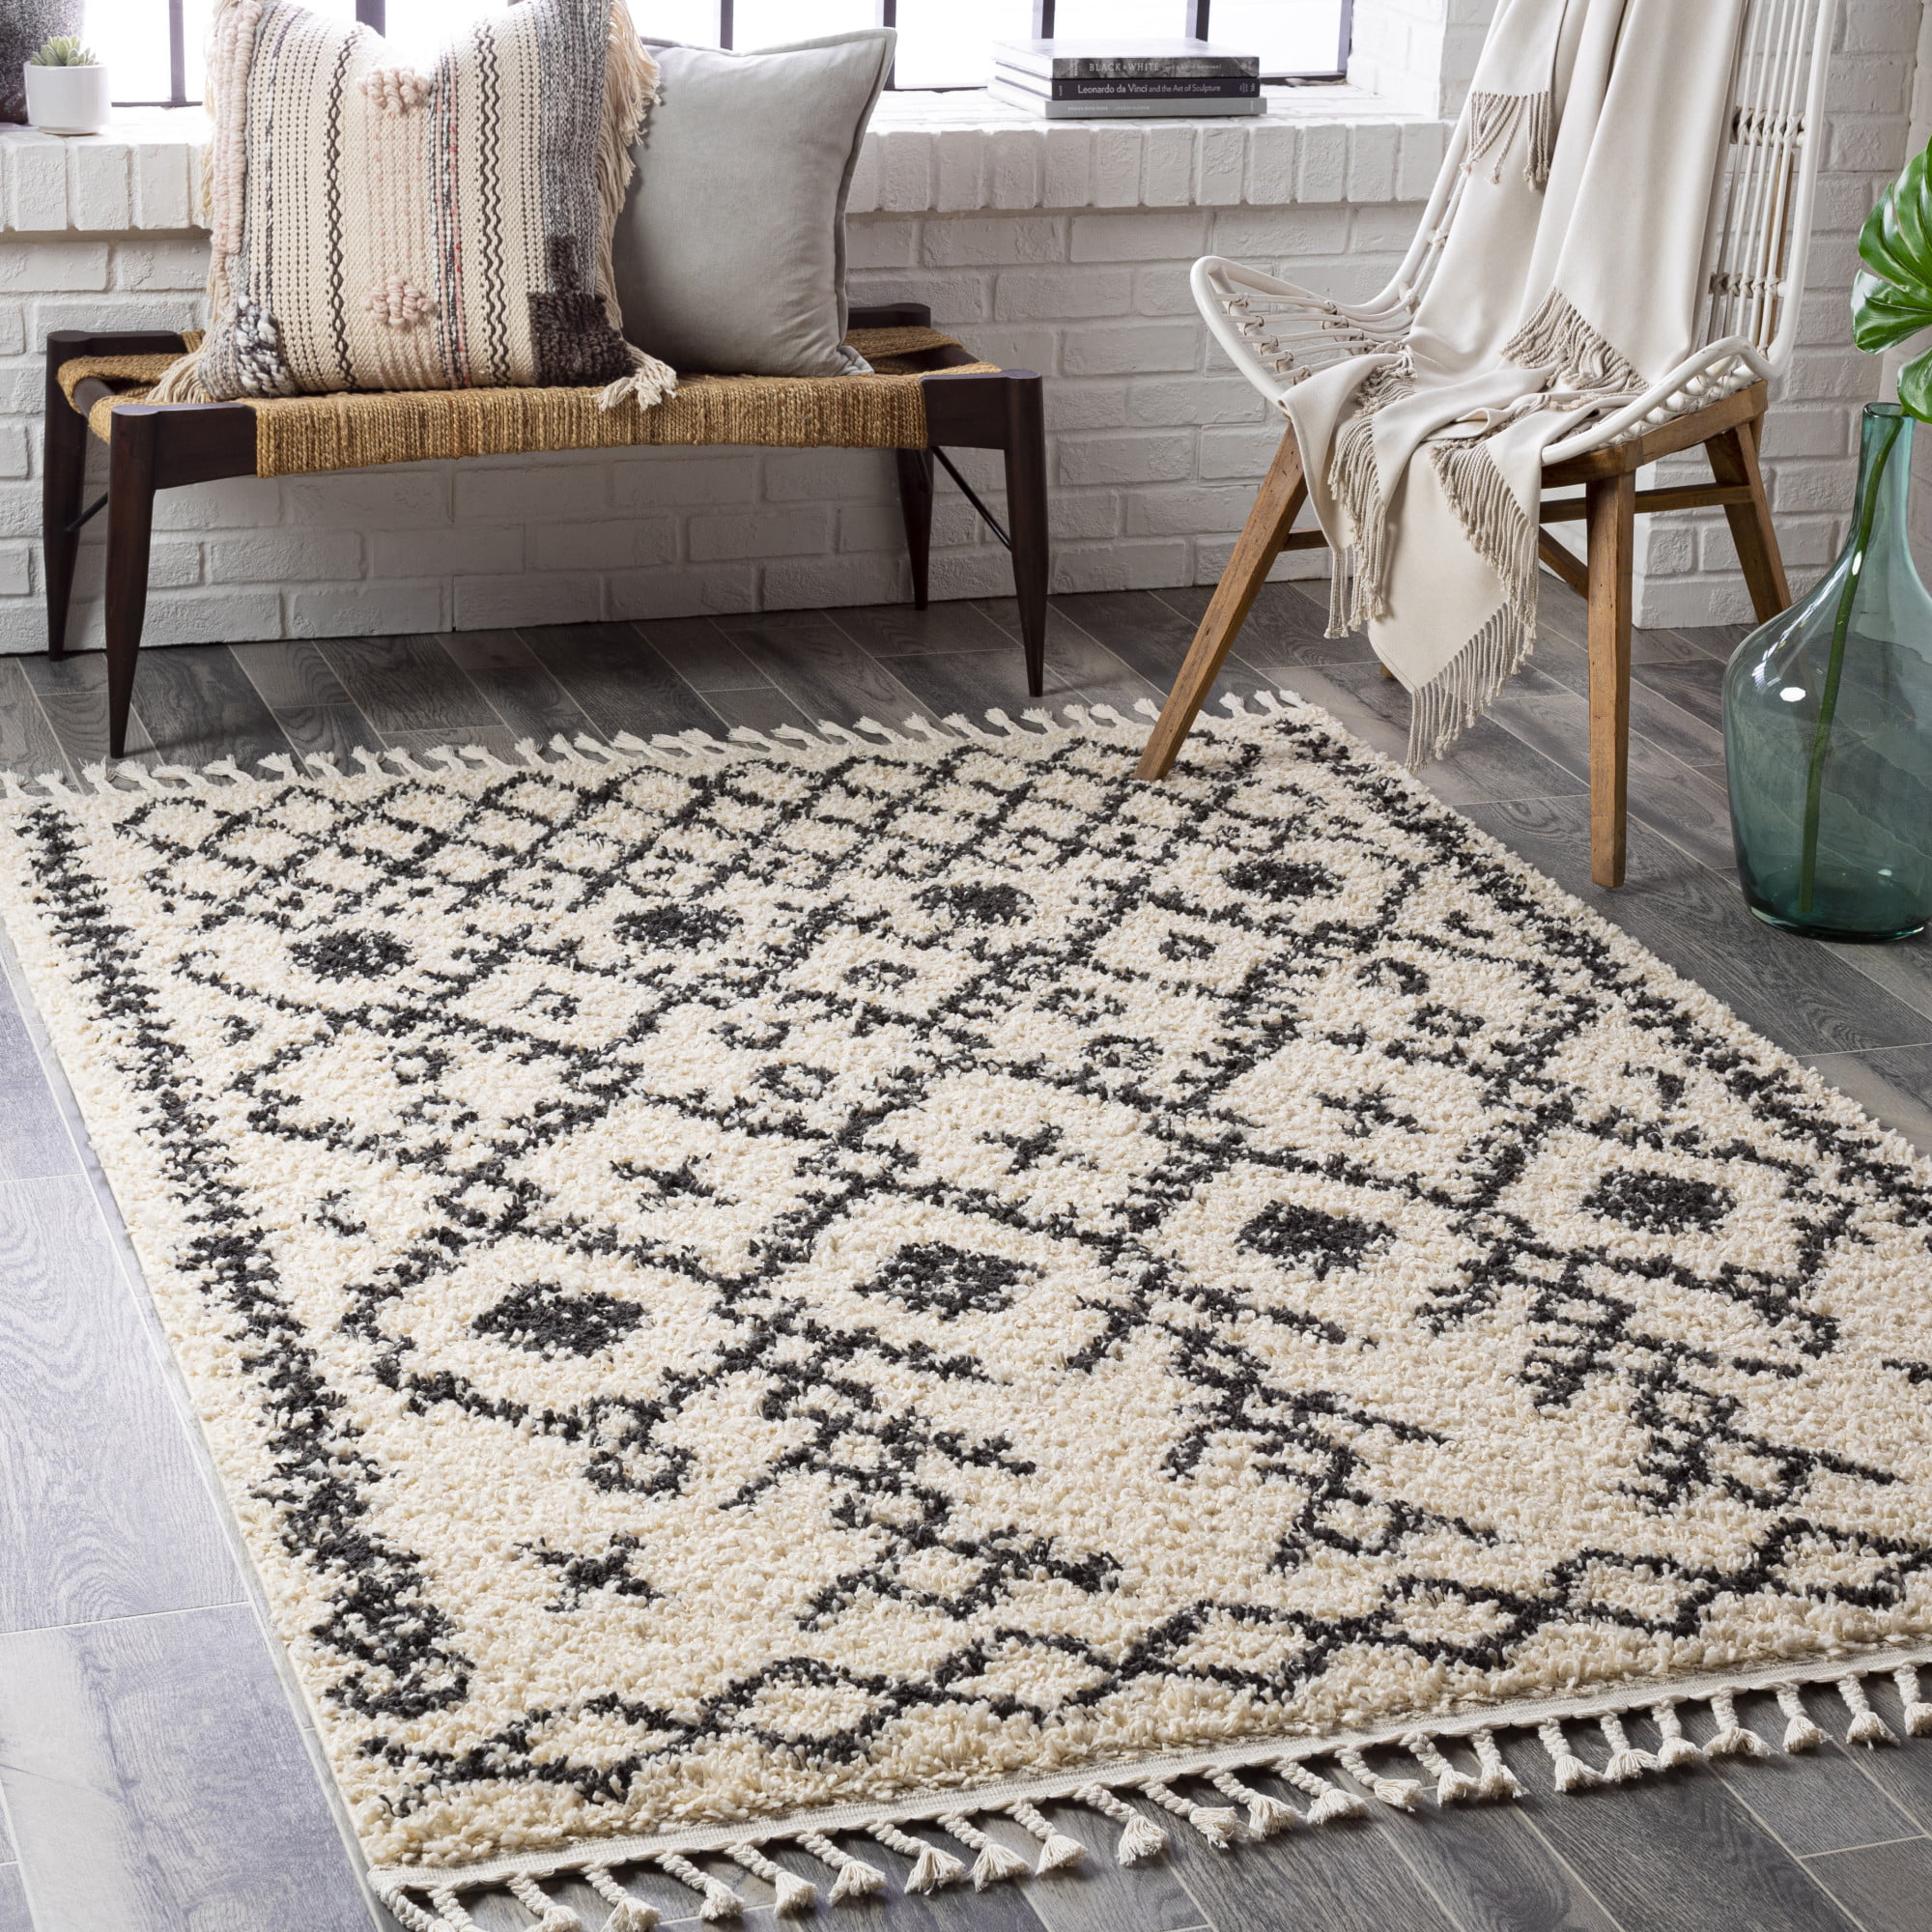 Selma Moroccan Design Charcoal Grey Shaggy Floor Rug 5 Sizes **FREE DELIVERY** 